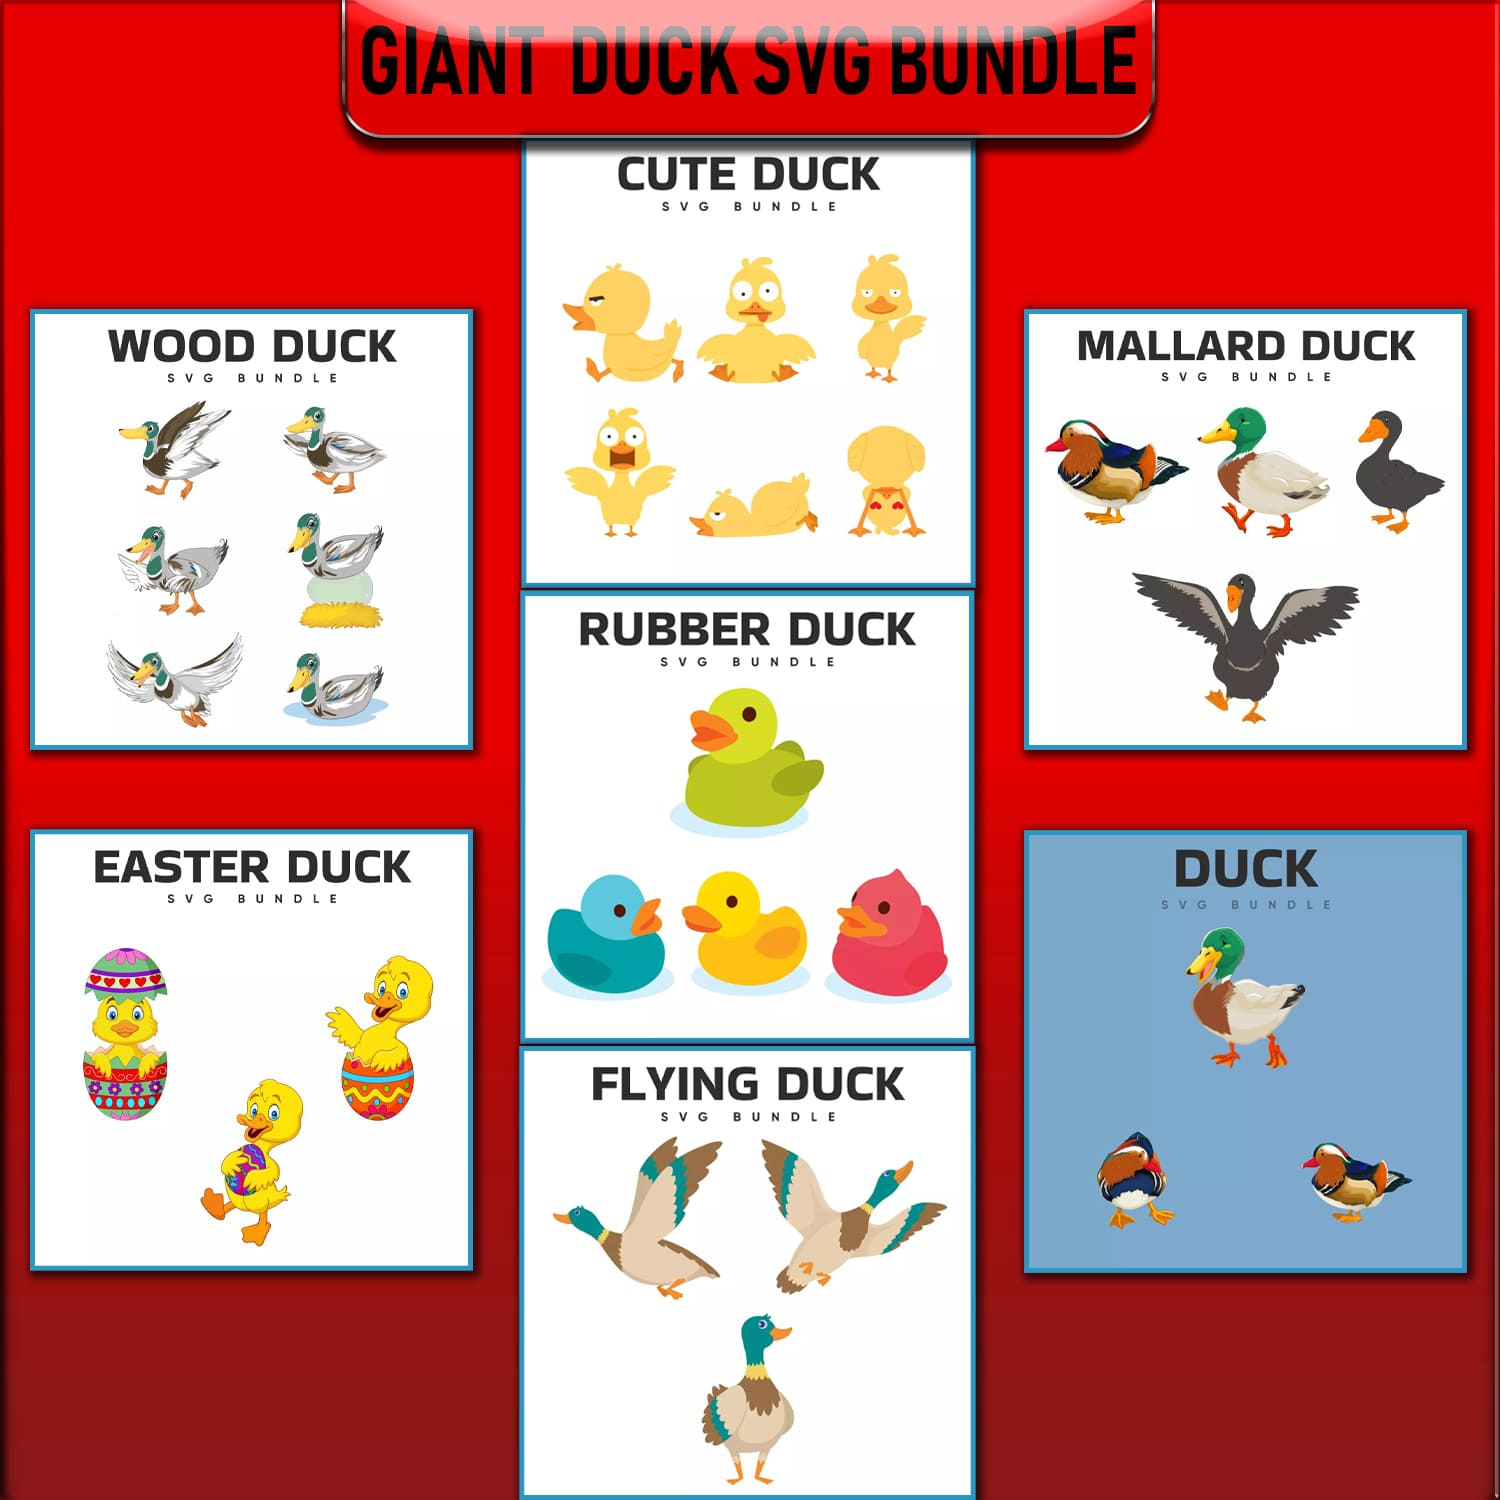 Poster showing different types of ducks.